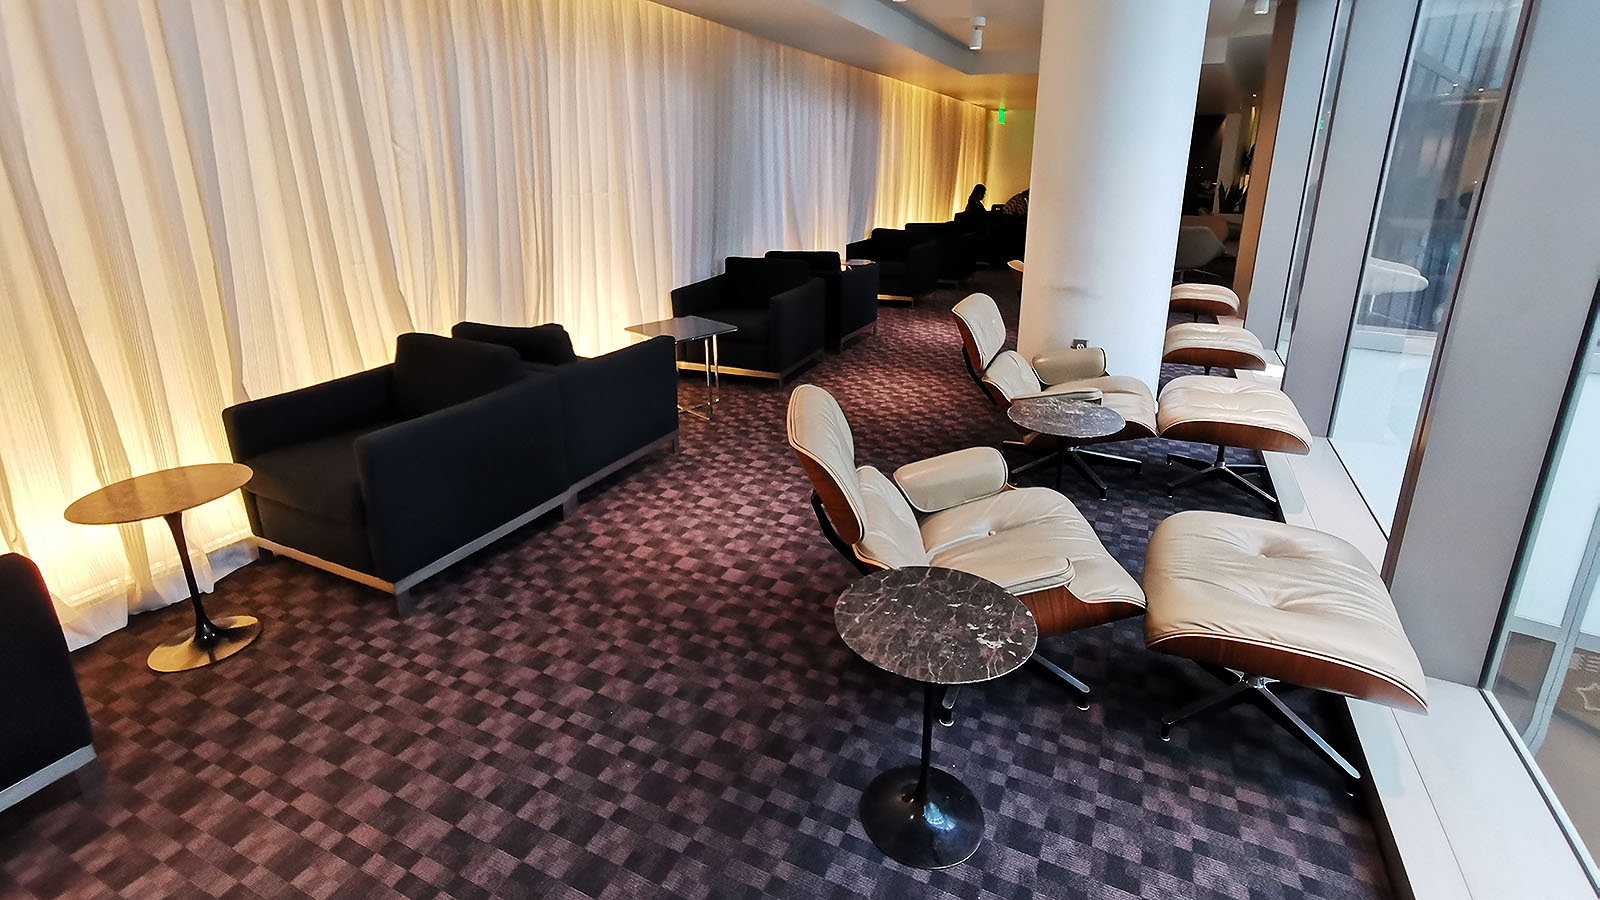 Seating in the Qantas International Business Lounge in Los Angeles